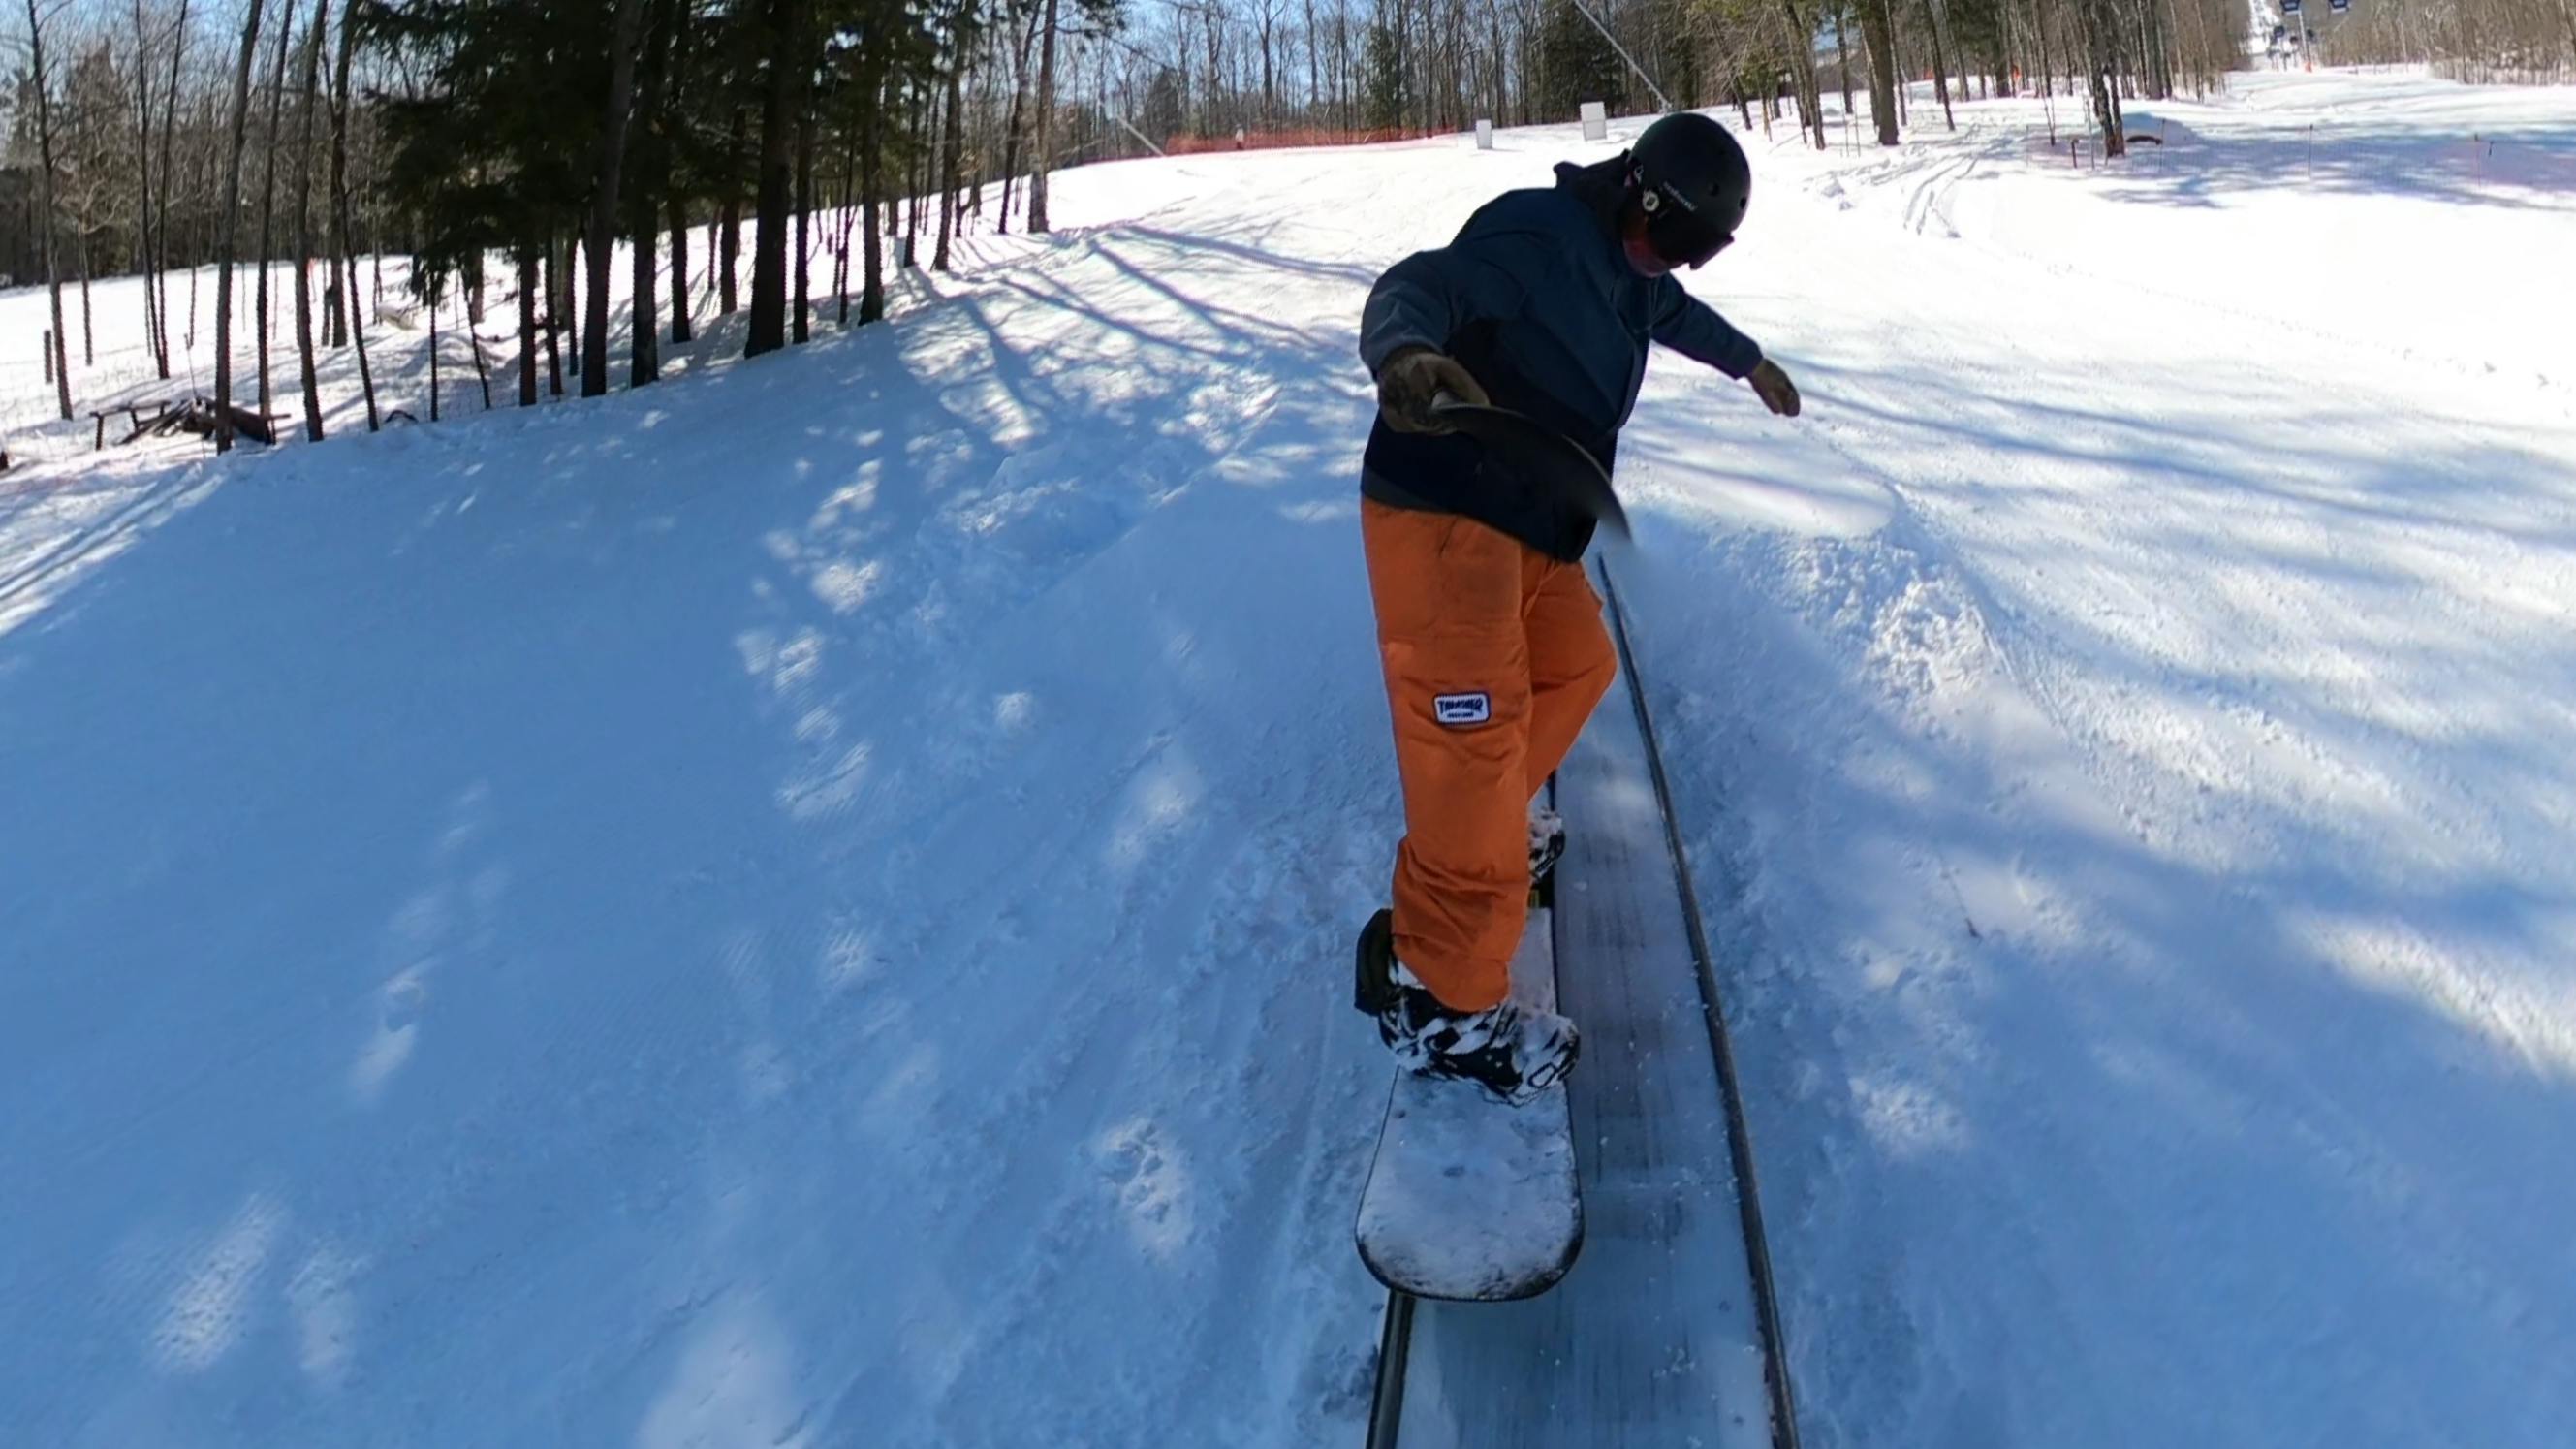 A snowboarder on the Rome Mechanic Snowboard.